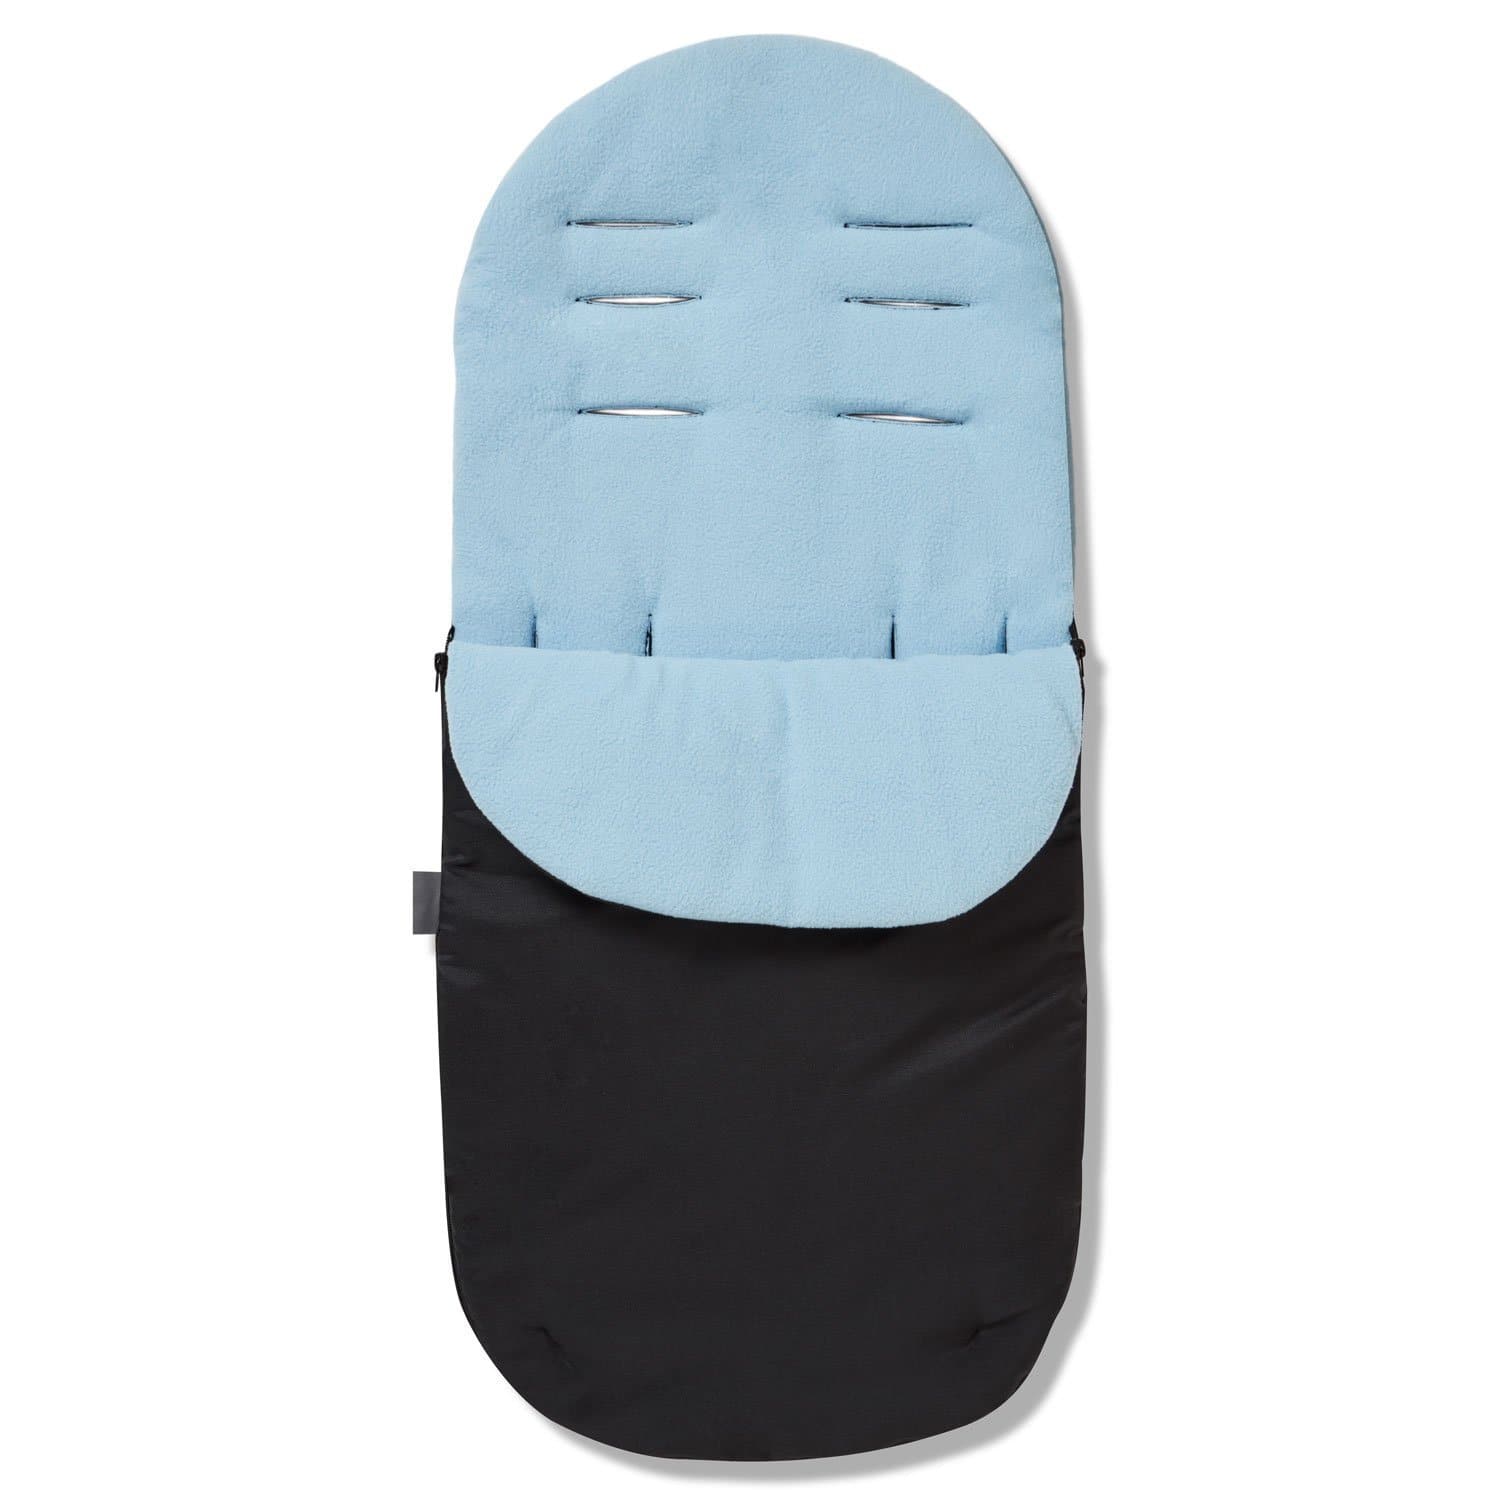 Footmuff / Cosy Toes Compatible with Casual - Light Blue / Fits All Models | For Your Little One